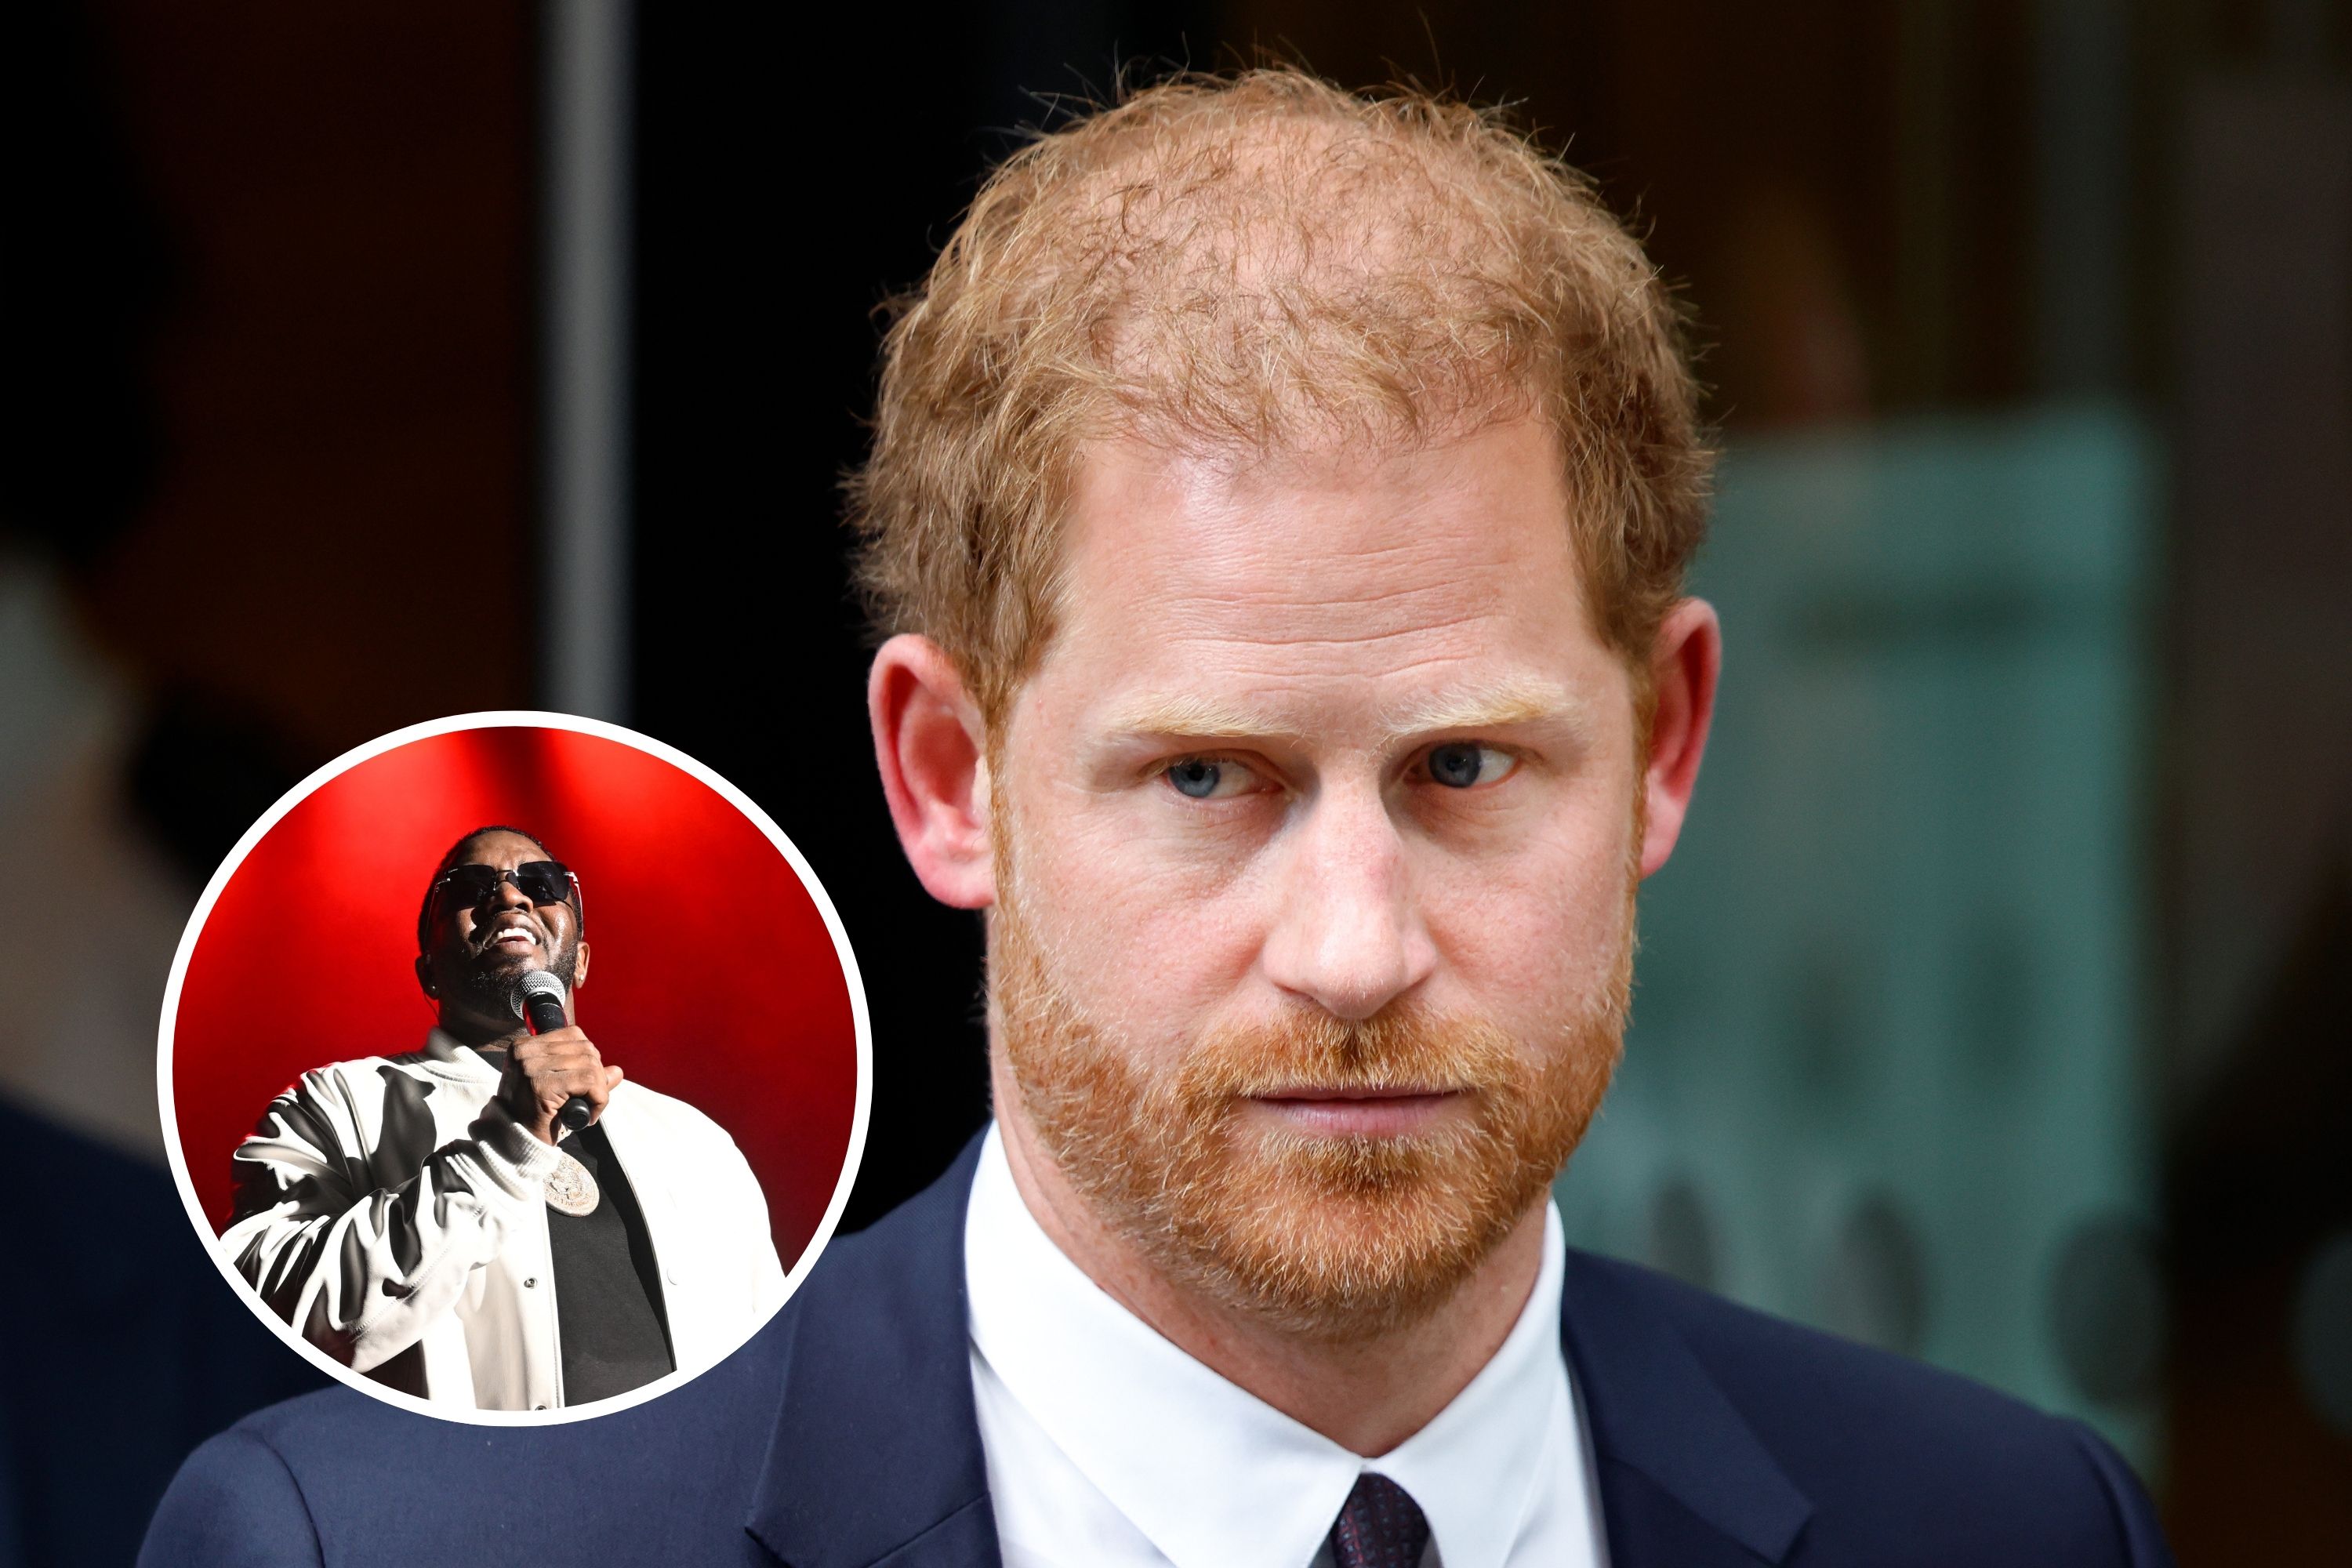 Prince Harry Being Linked to Diddy Parties Has Major Flaw - Newsweek